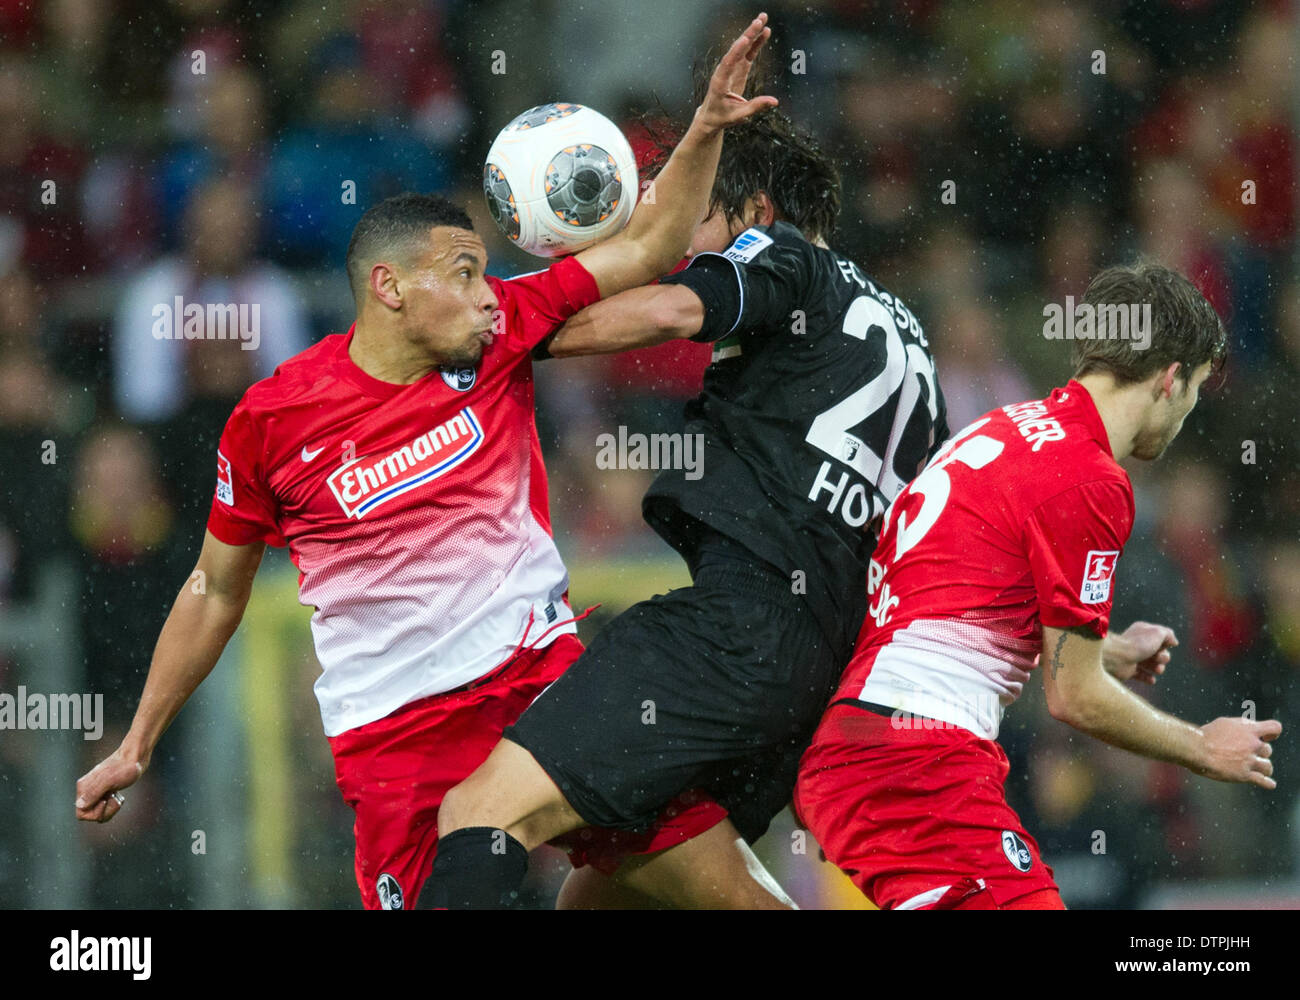 Freiburg, Germany. 22nd Feb, 2014. Freiburg's Philipp Zulechner (R) and Francis Coquelin (L) in action against Augsburg's Jeong-Ho Hong during the soccer Bundesliga match bewteen Sport-Club Freiburg and FC Augsburg at the Mage-Solar-Stadion in Freiburg, Germany, 22 February 2014. Photo: UWE ANSPACH/dpa (ATTENTION: Due to the accreditation guidelines, the DFL only permits the publication and utilisation of up to 15 pictures per match on the internet and in online media during the match.)/dpa/Alamy Live News Stock Photo